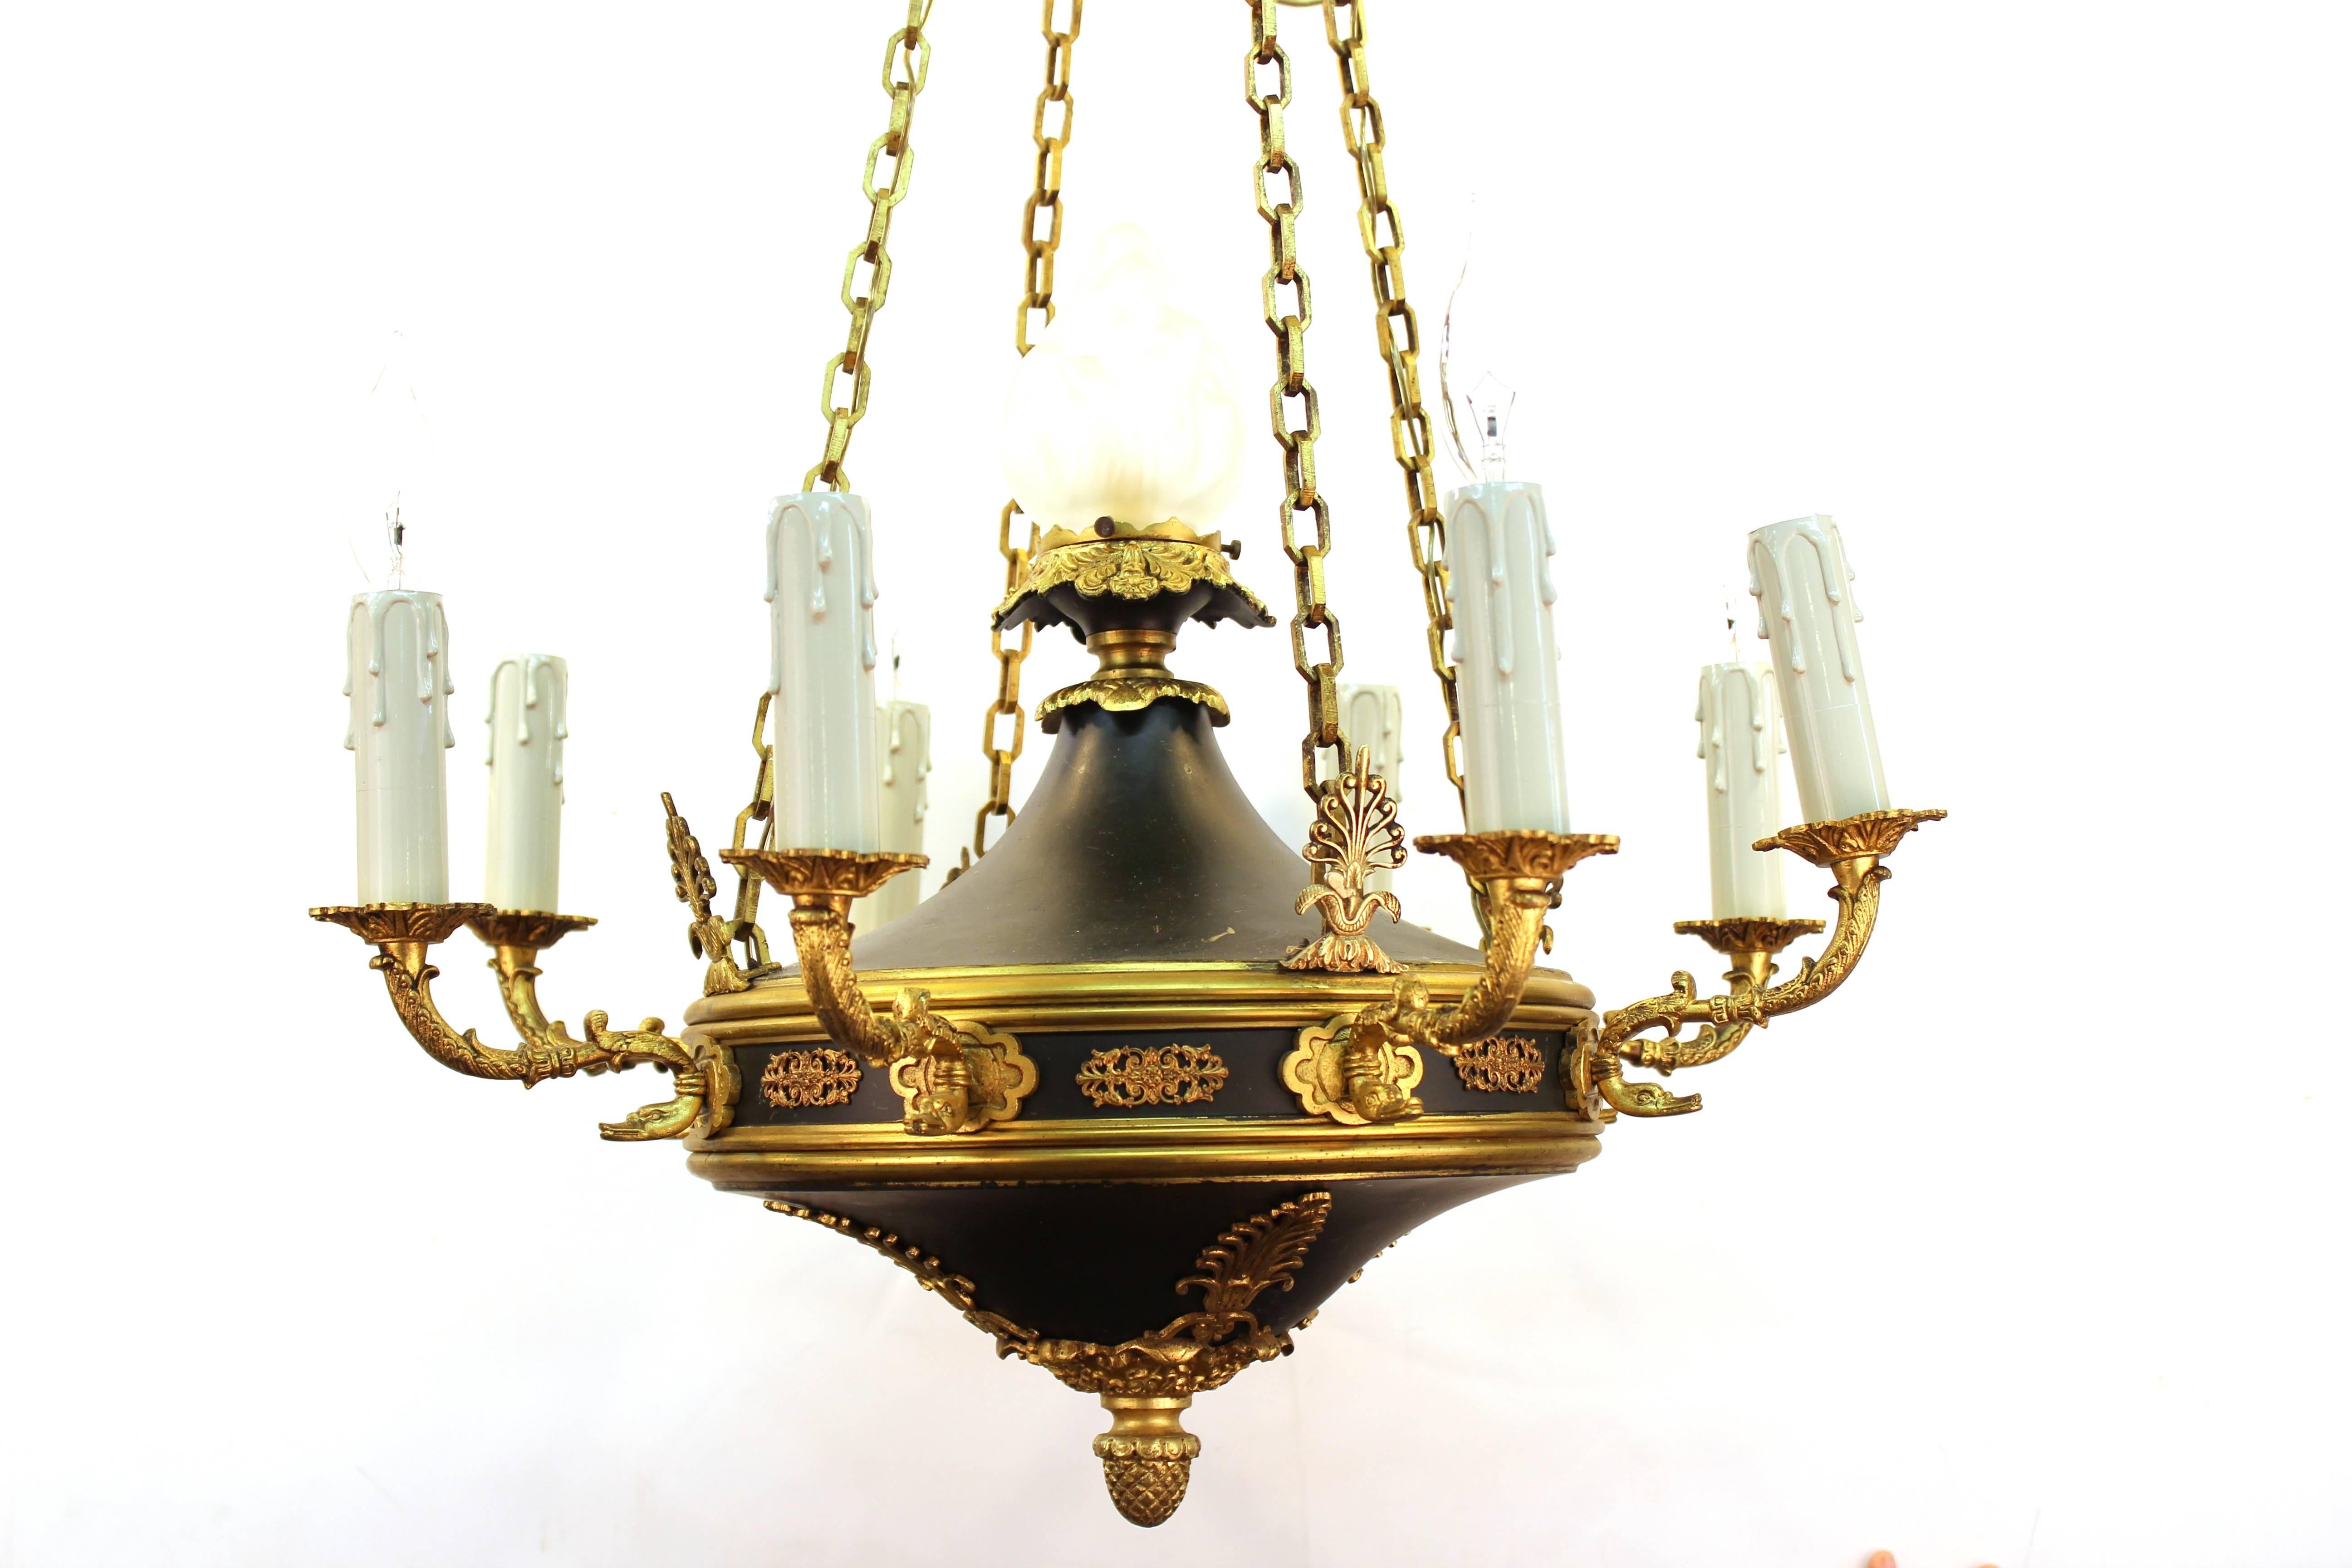 A 19th Century French Empire Chandelier. Includes nine lights with faux candle sockets. Features a rare dark olive green enamel body with gilded decoration.  Recently re-wired to US standards. This fixture remains in very good condition.